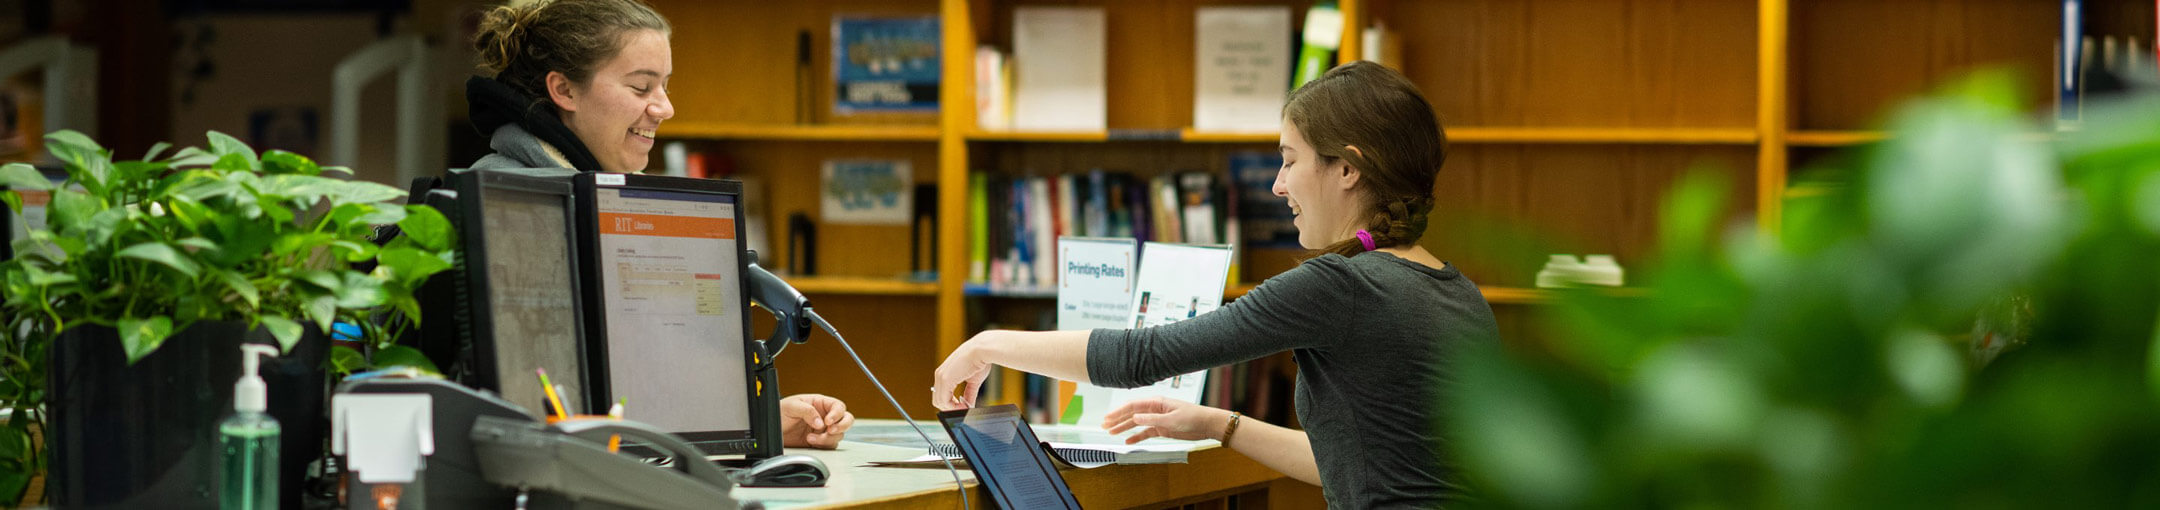 An RIT student employee helping a fellow student in the library